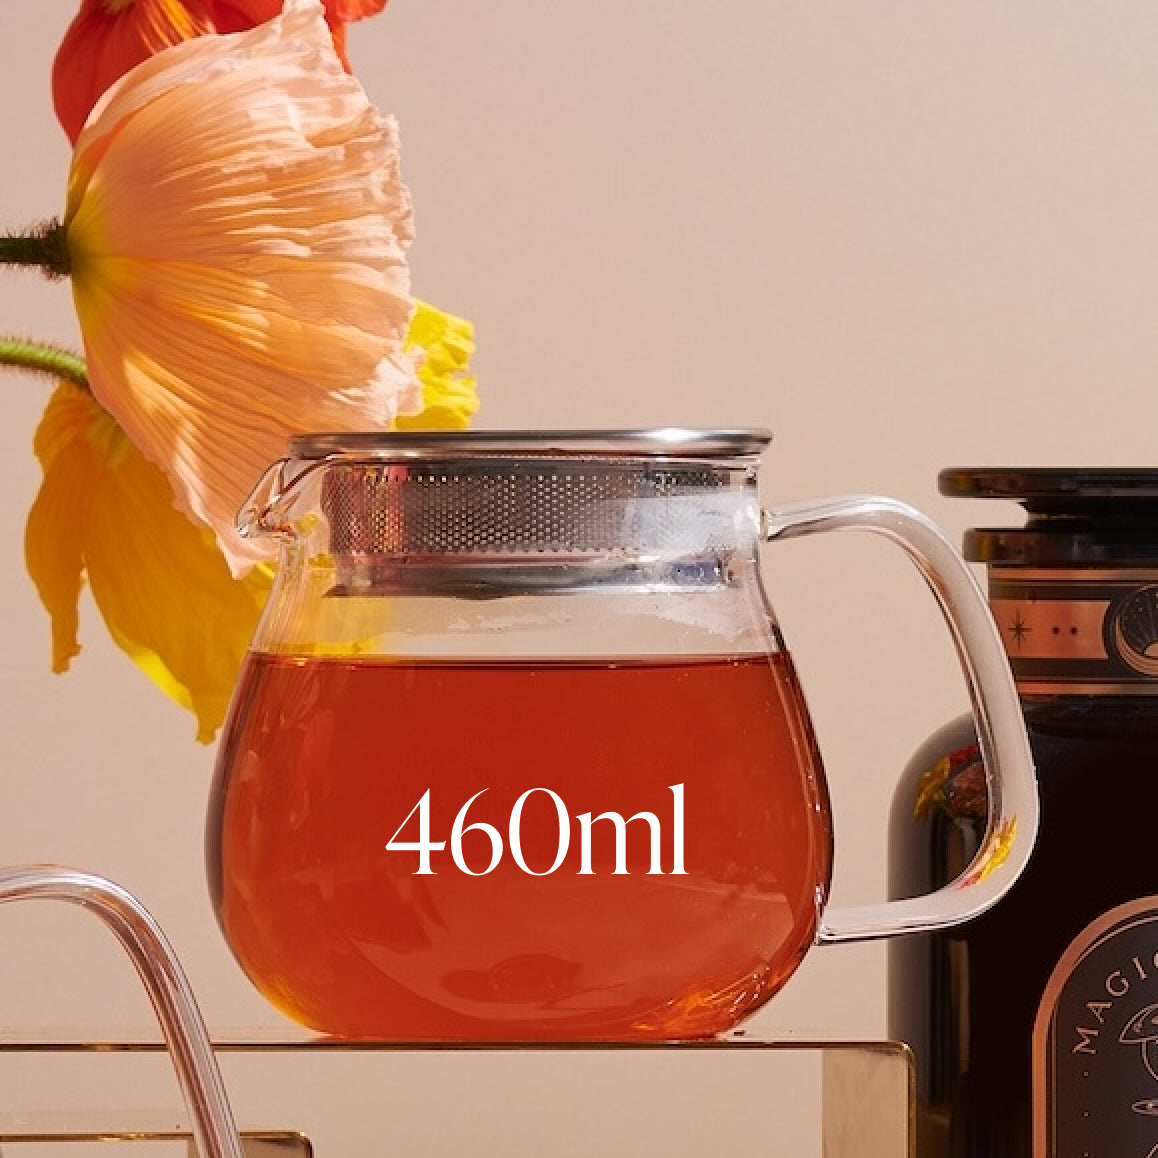 A glass Kinto One Touch Teapot filled with loose leaf tea, labeled "460ml," sits on a clear surface. The teapot has a metal lid with a built-in strainer. Behind the teapot, there is a blooming flower and an out-of-focus dark jar with an organic tea label on it.